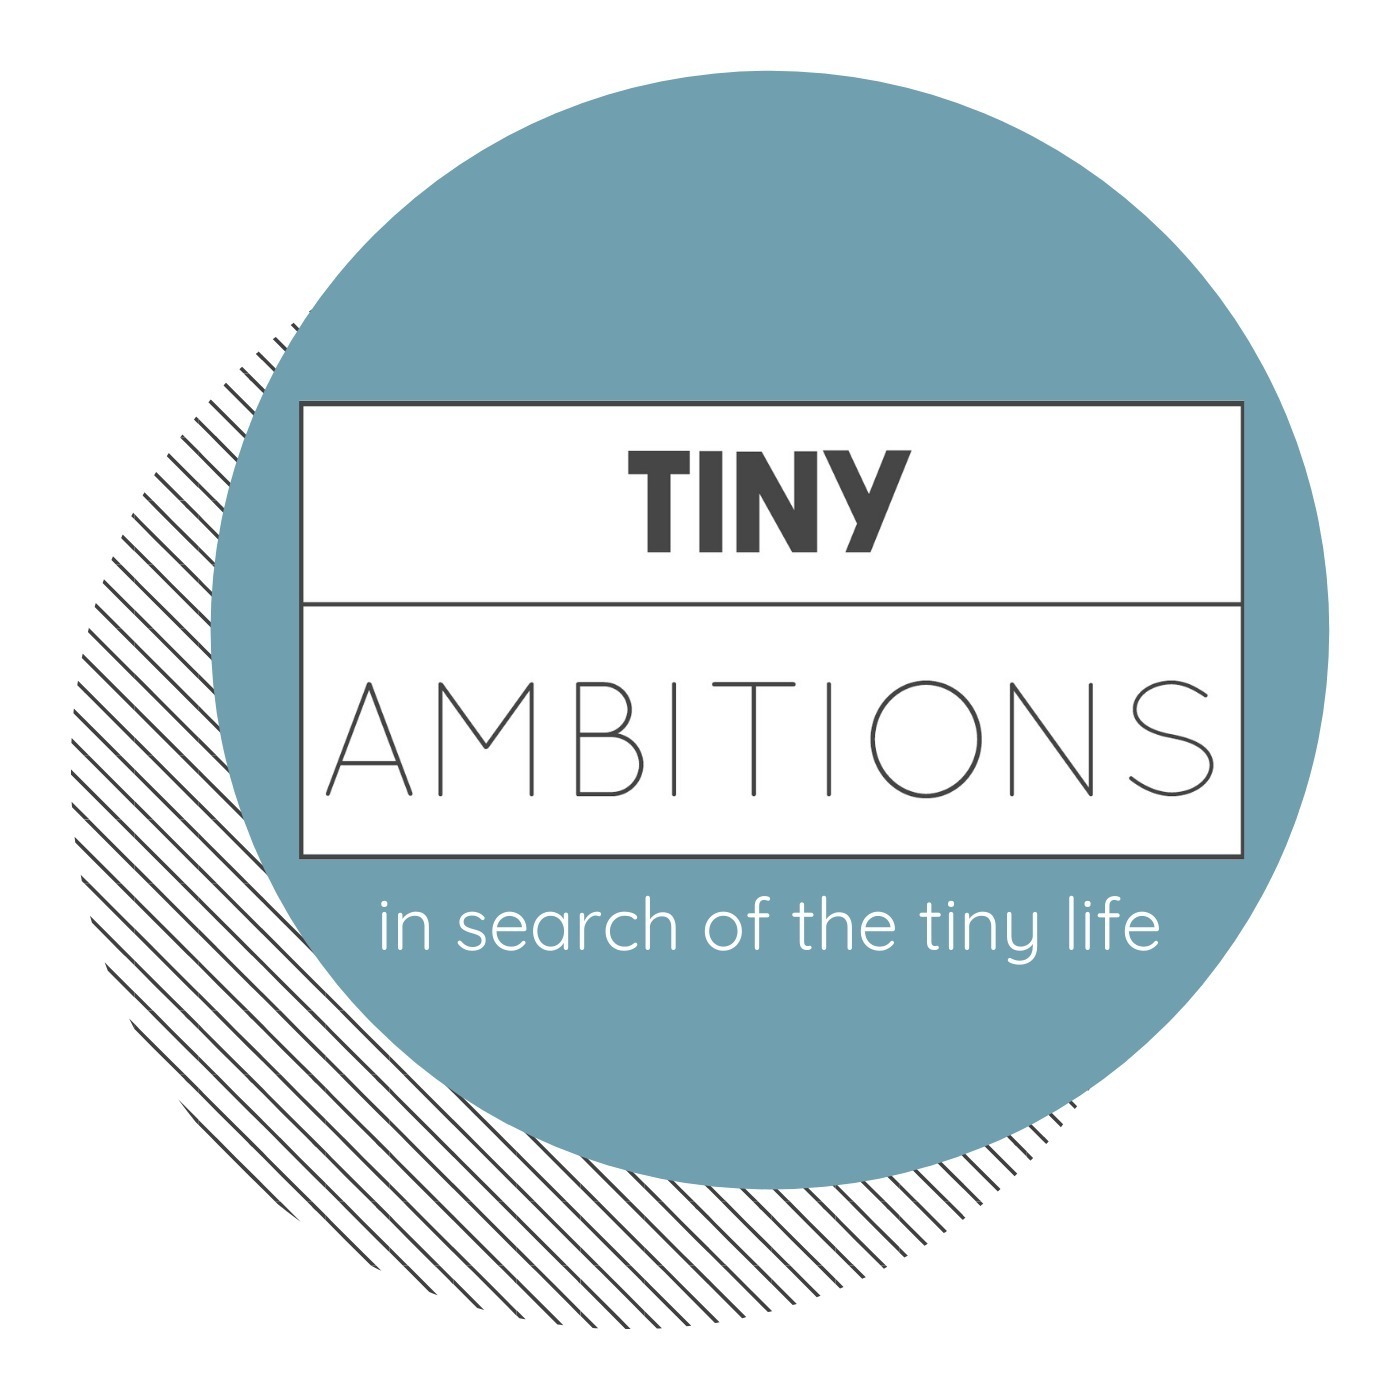 51: The Tiny Ambitions Podcast - In Search of the Tiny Life